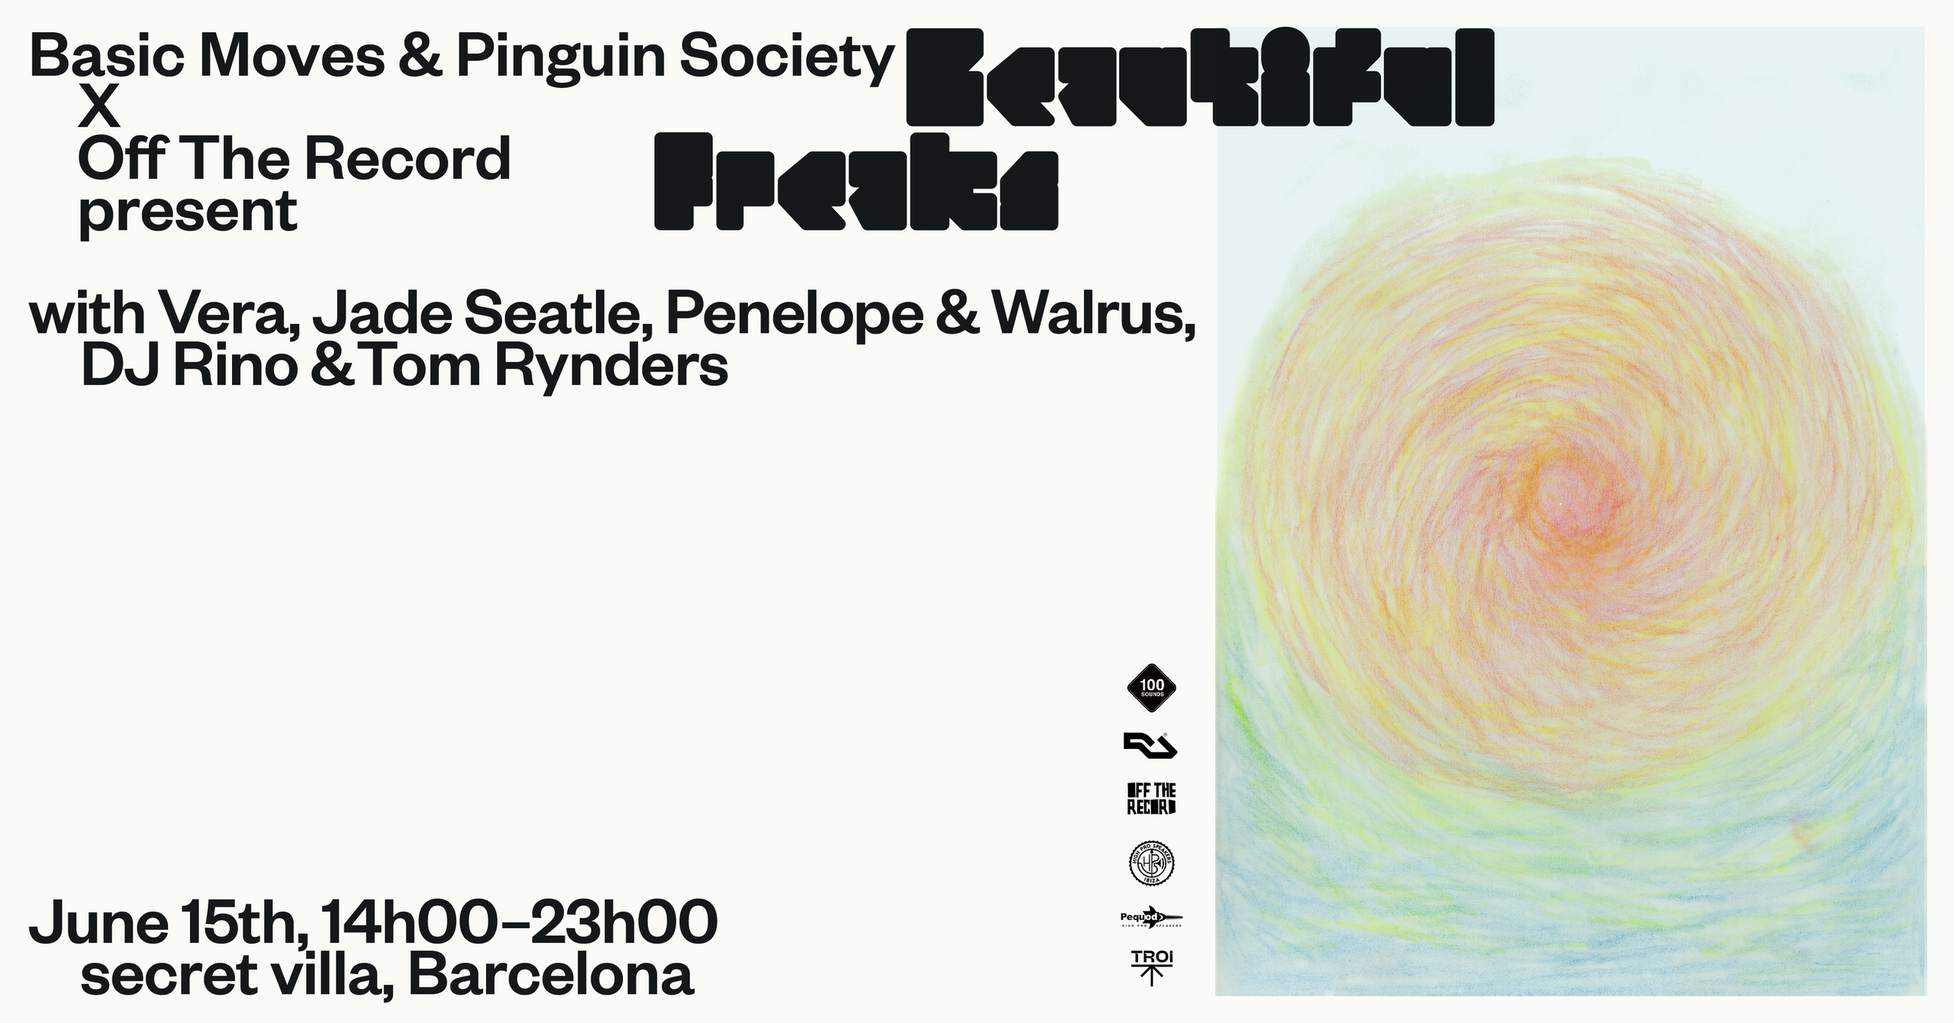 Basic Moves & Pinguin Society X Off The Record present: BEAUTIFUL FREAKS - フライヤー表